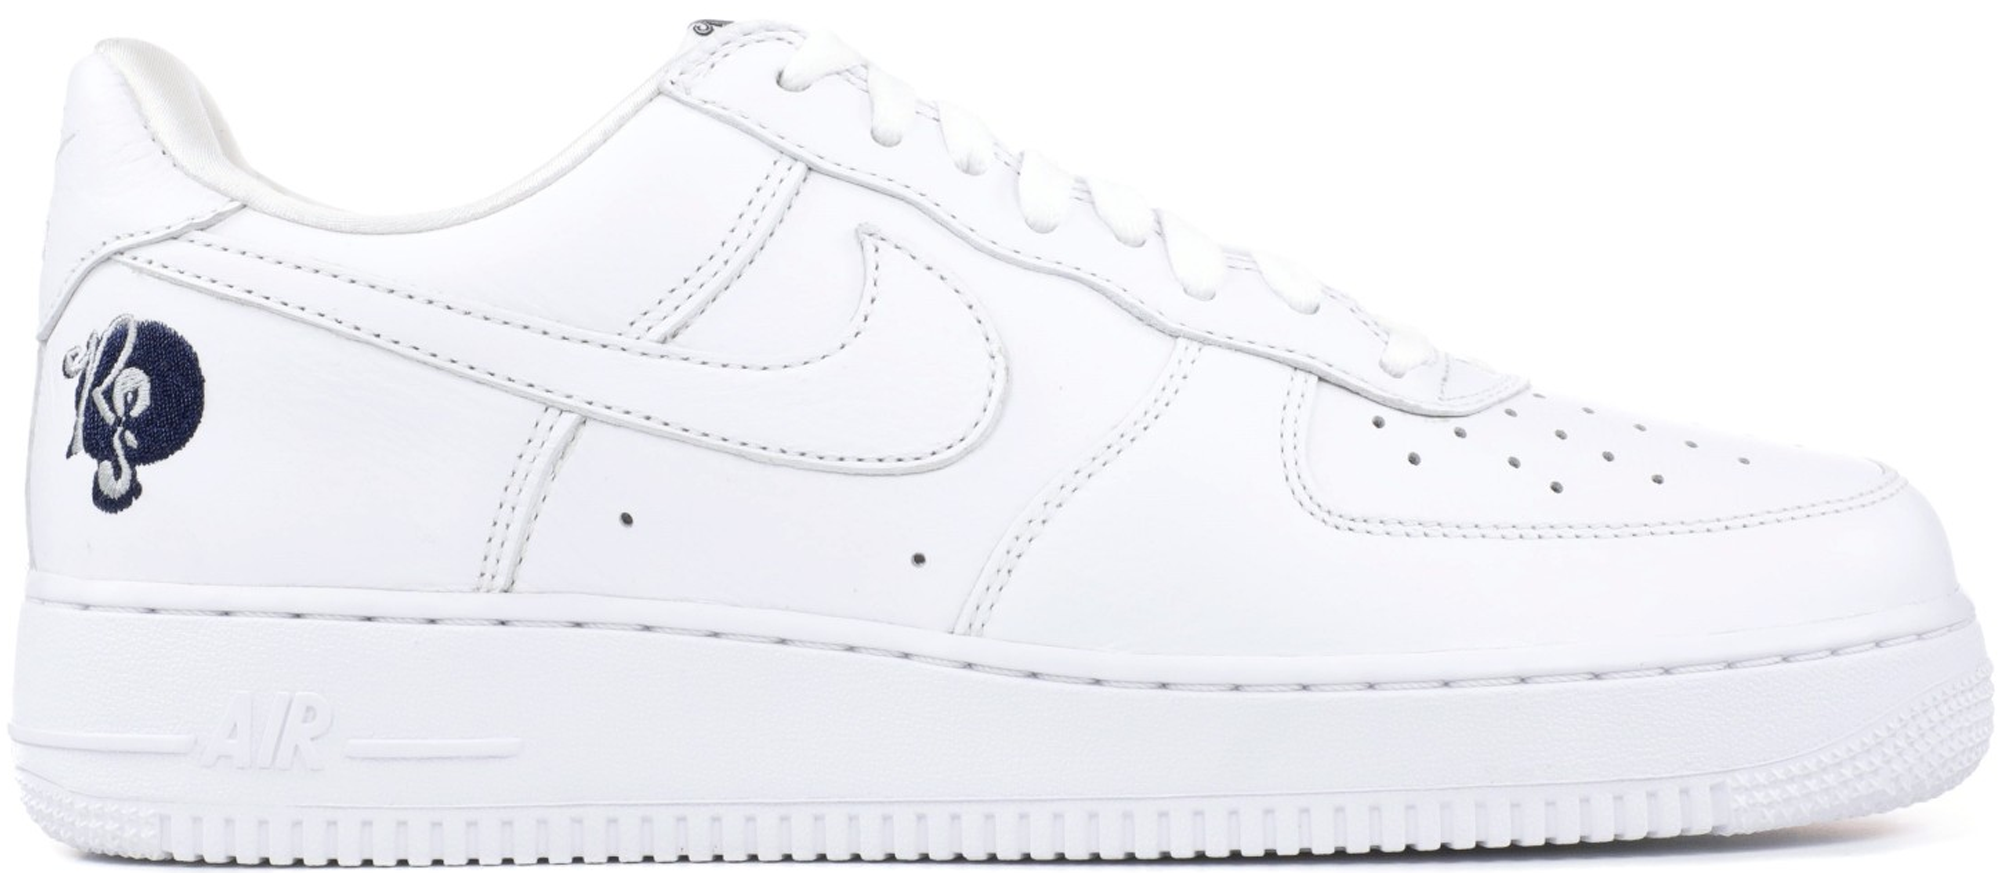 Nike Air Force 1 Low Roc-A-Fella Sample | Size 11, Sneaker in White/Black